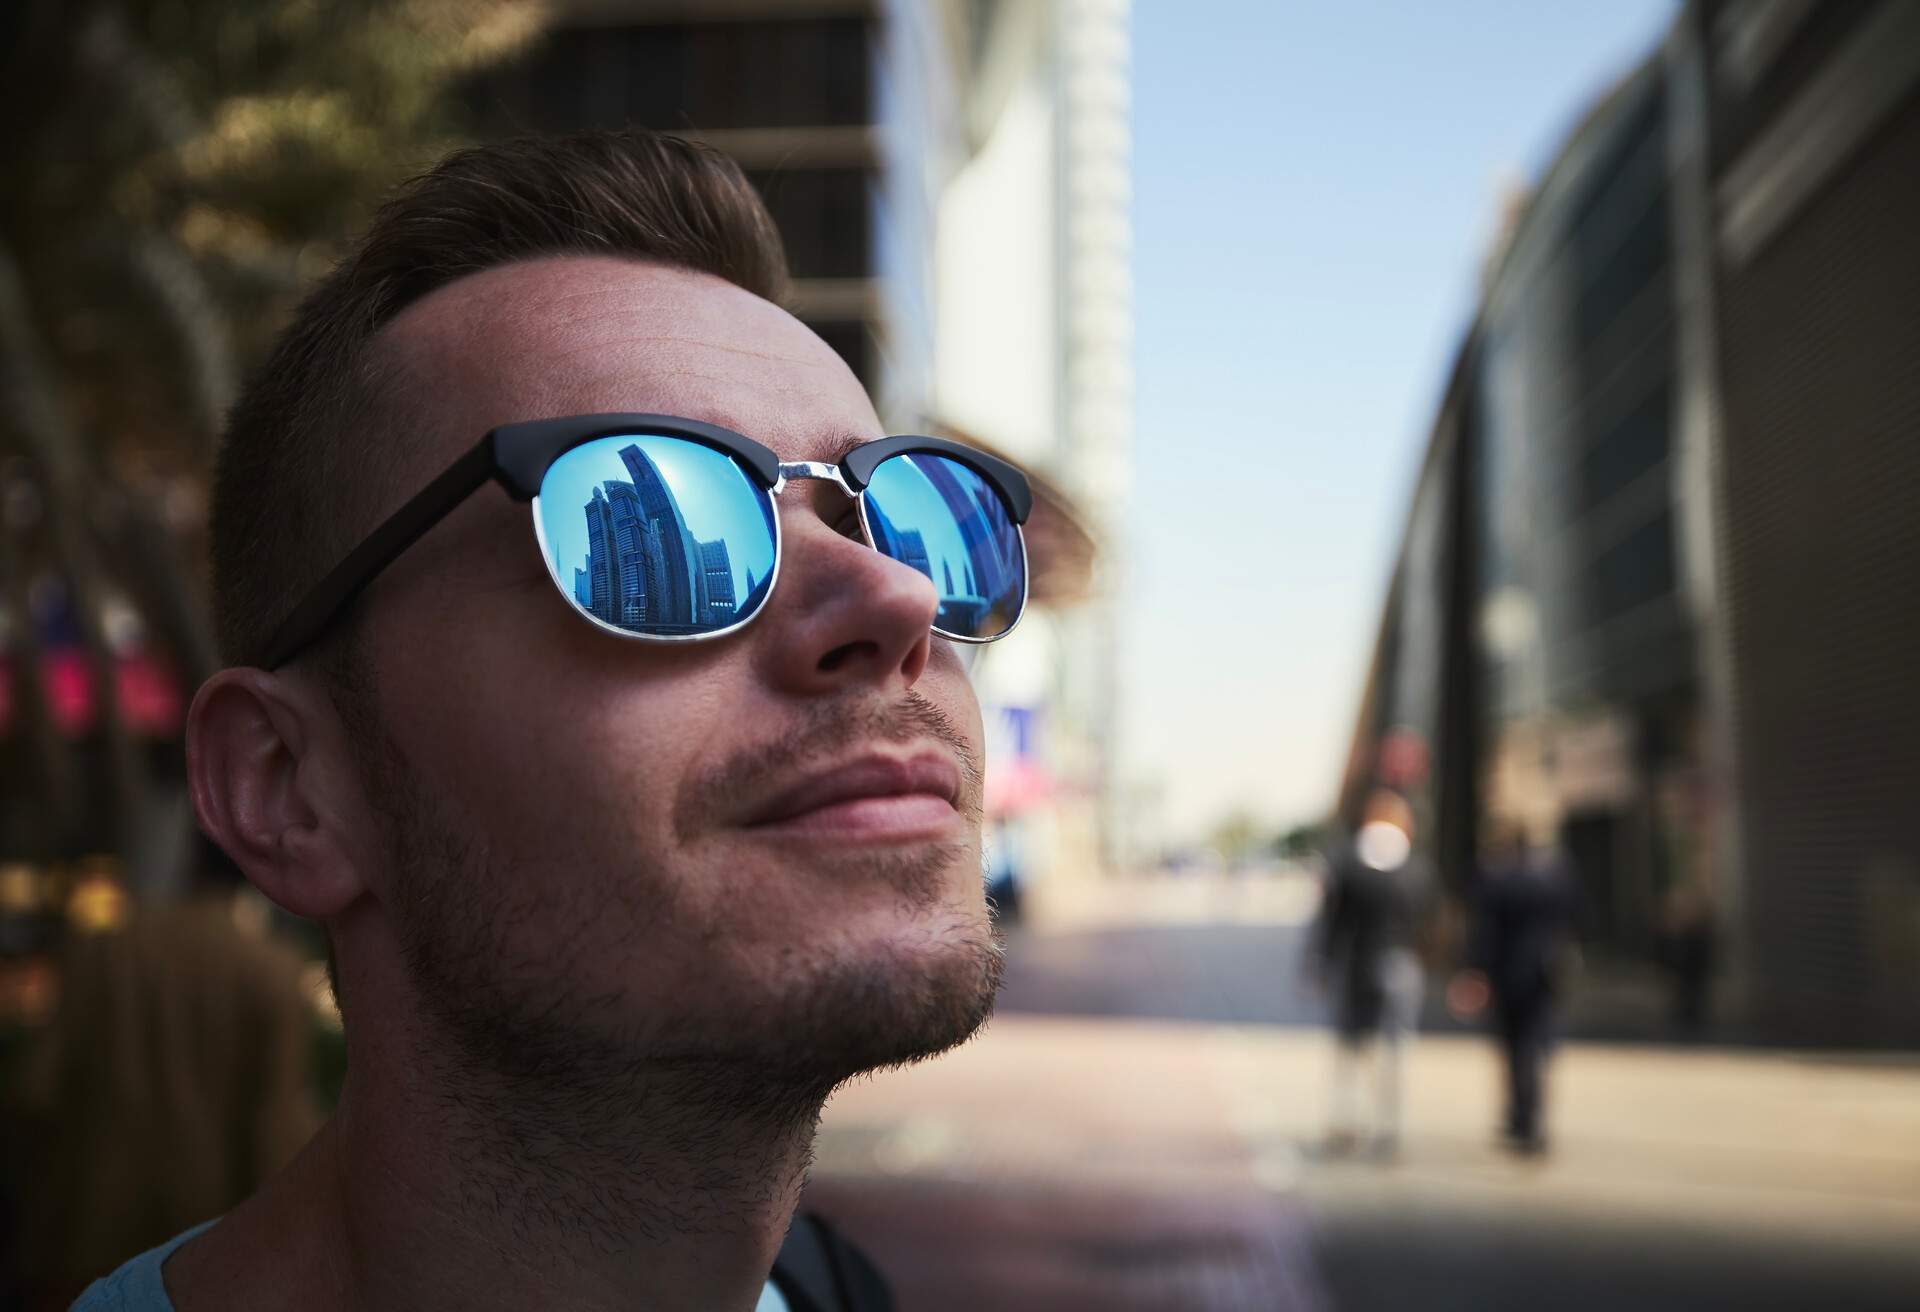 A man with sunglasses that reflects the towering skyscrapers.